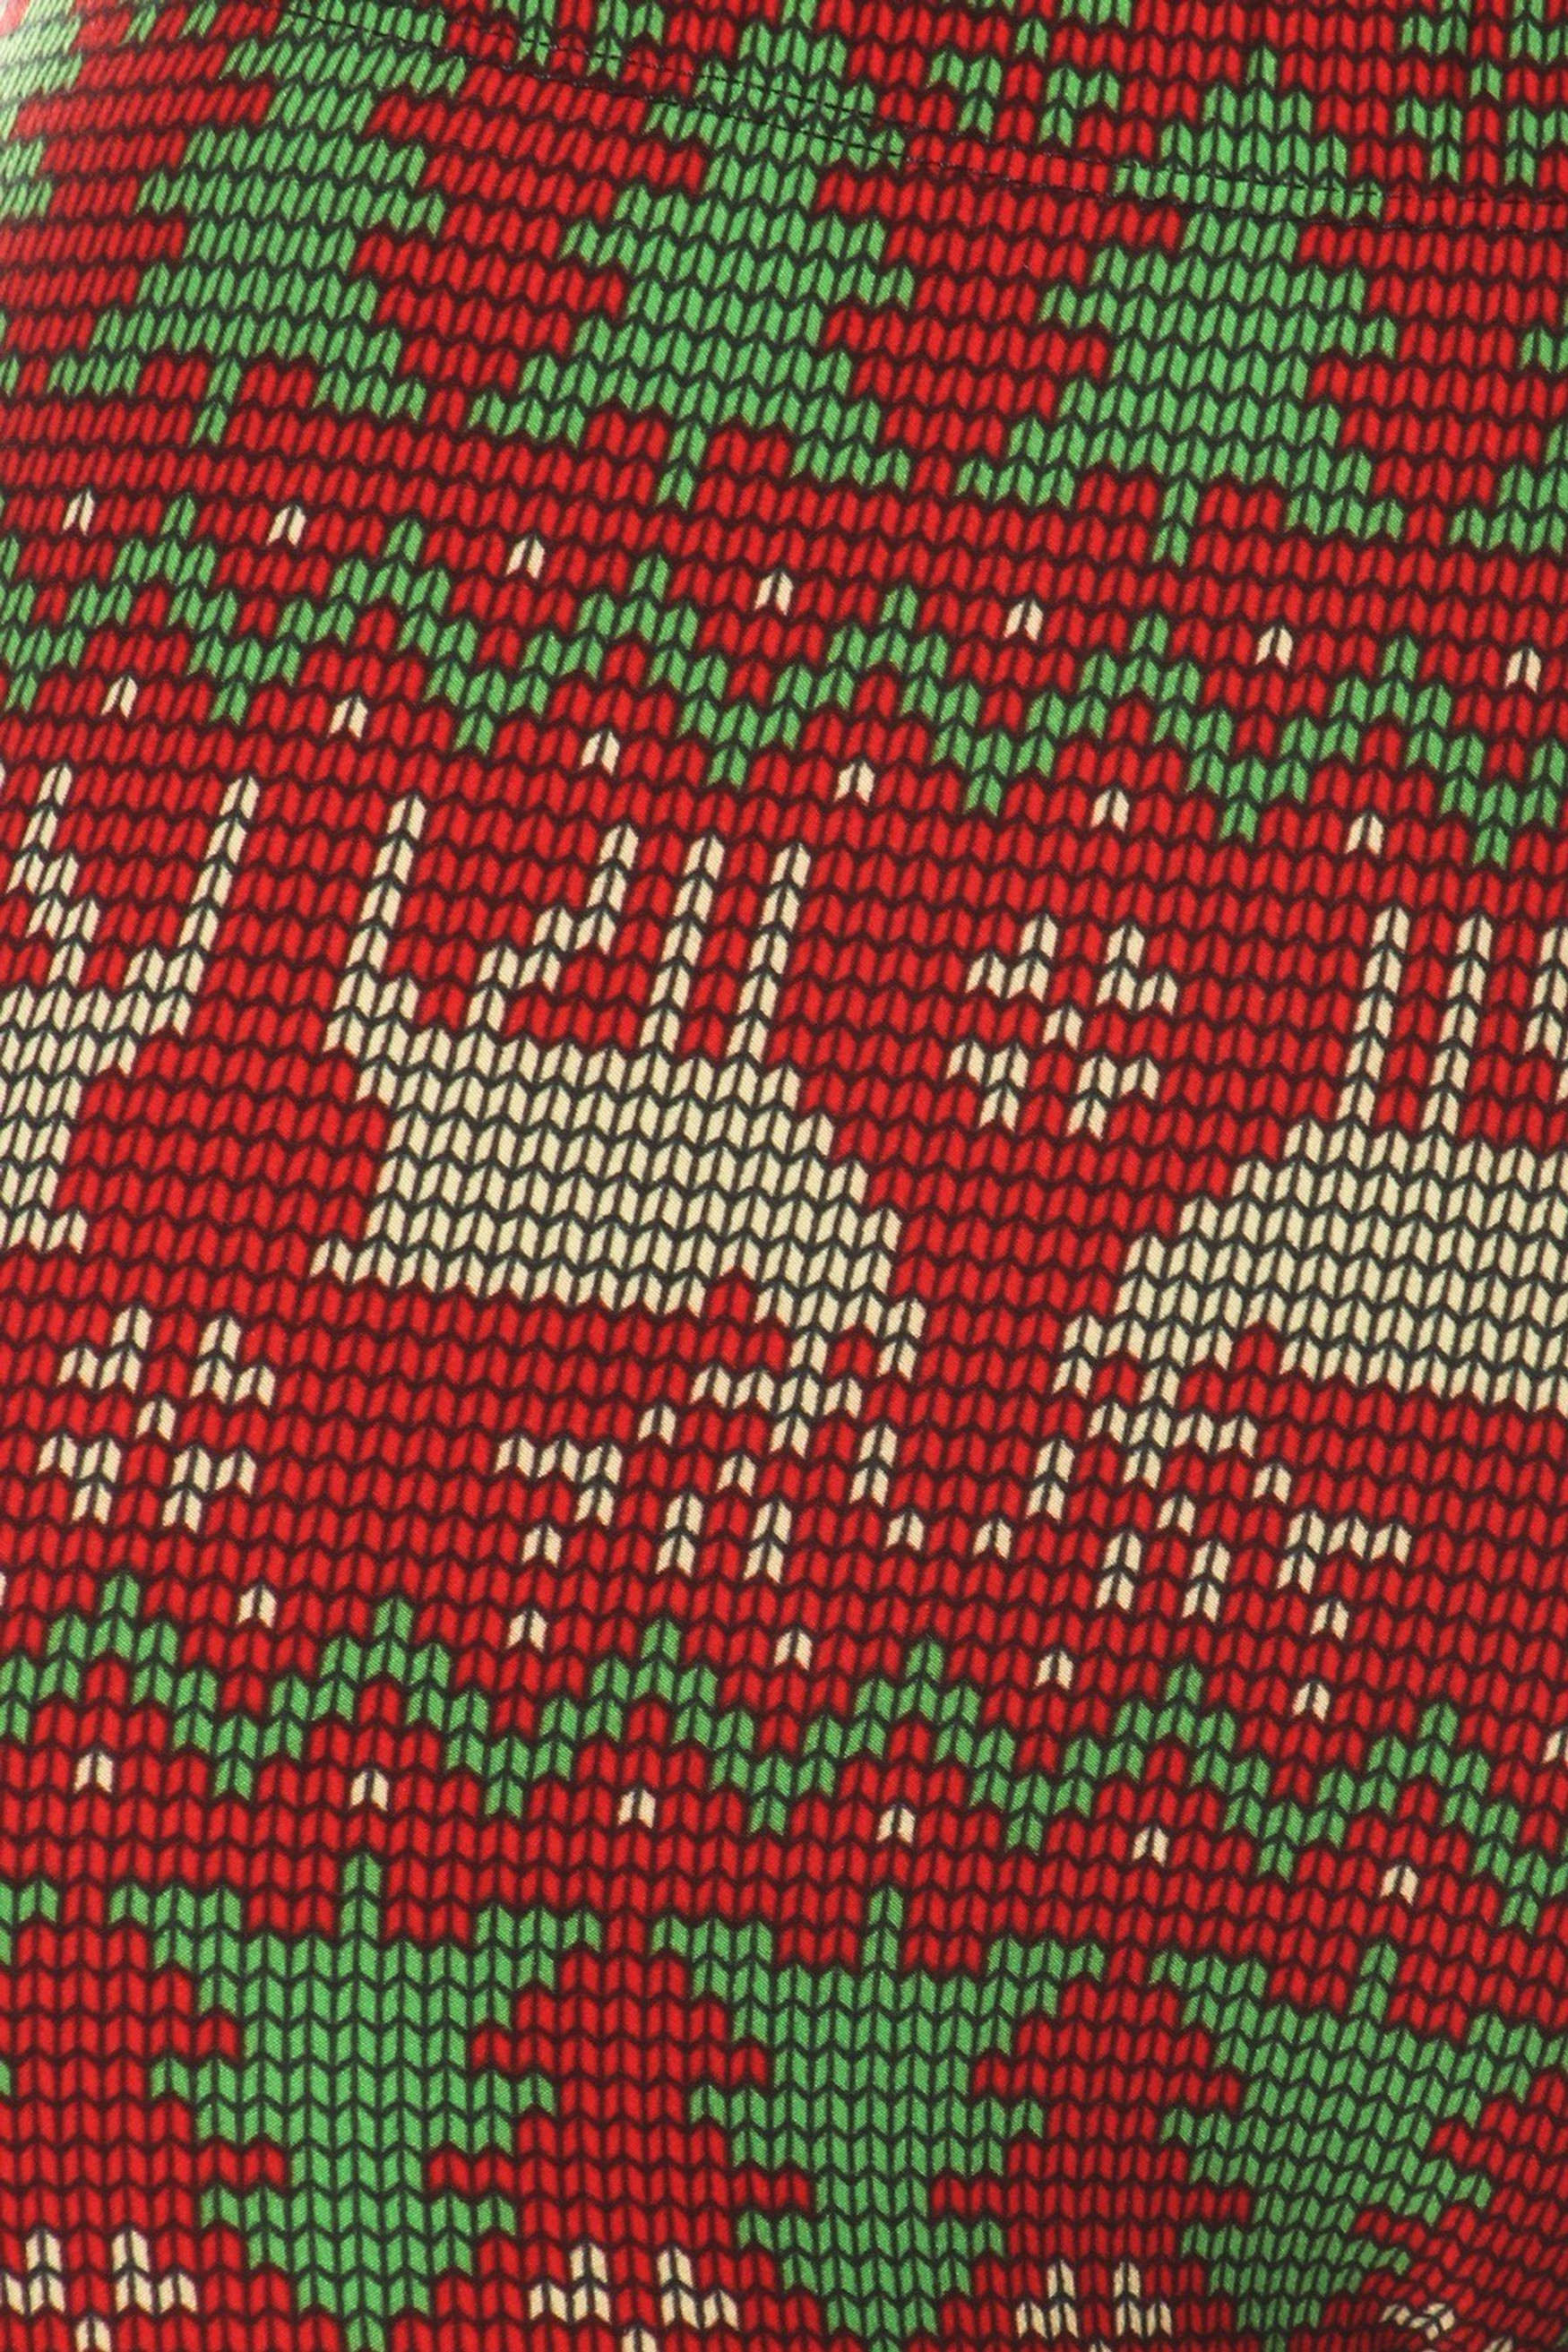 Brushed  Faux Knit Reindeer and Holiday Tree Leggings